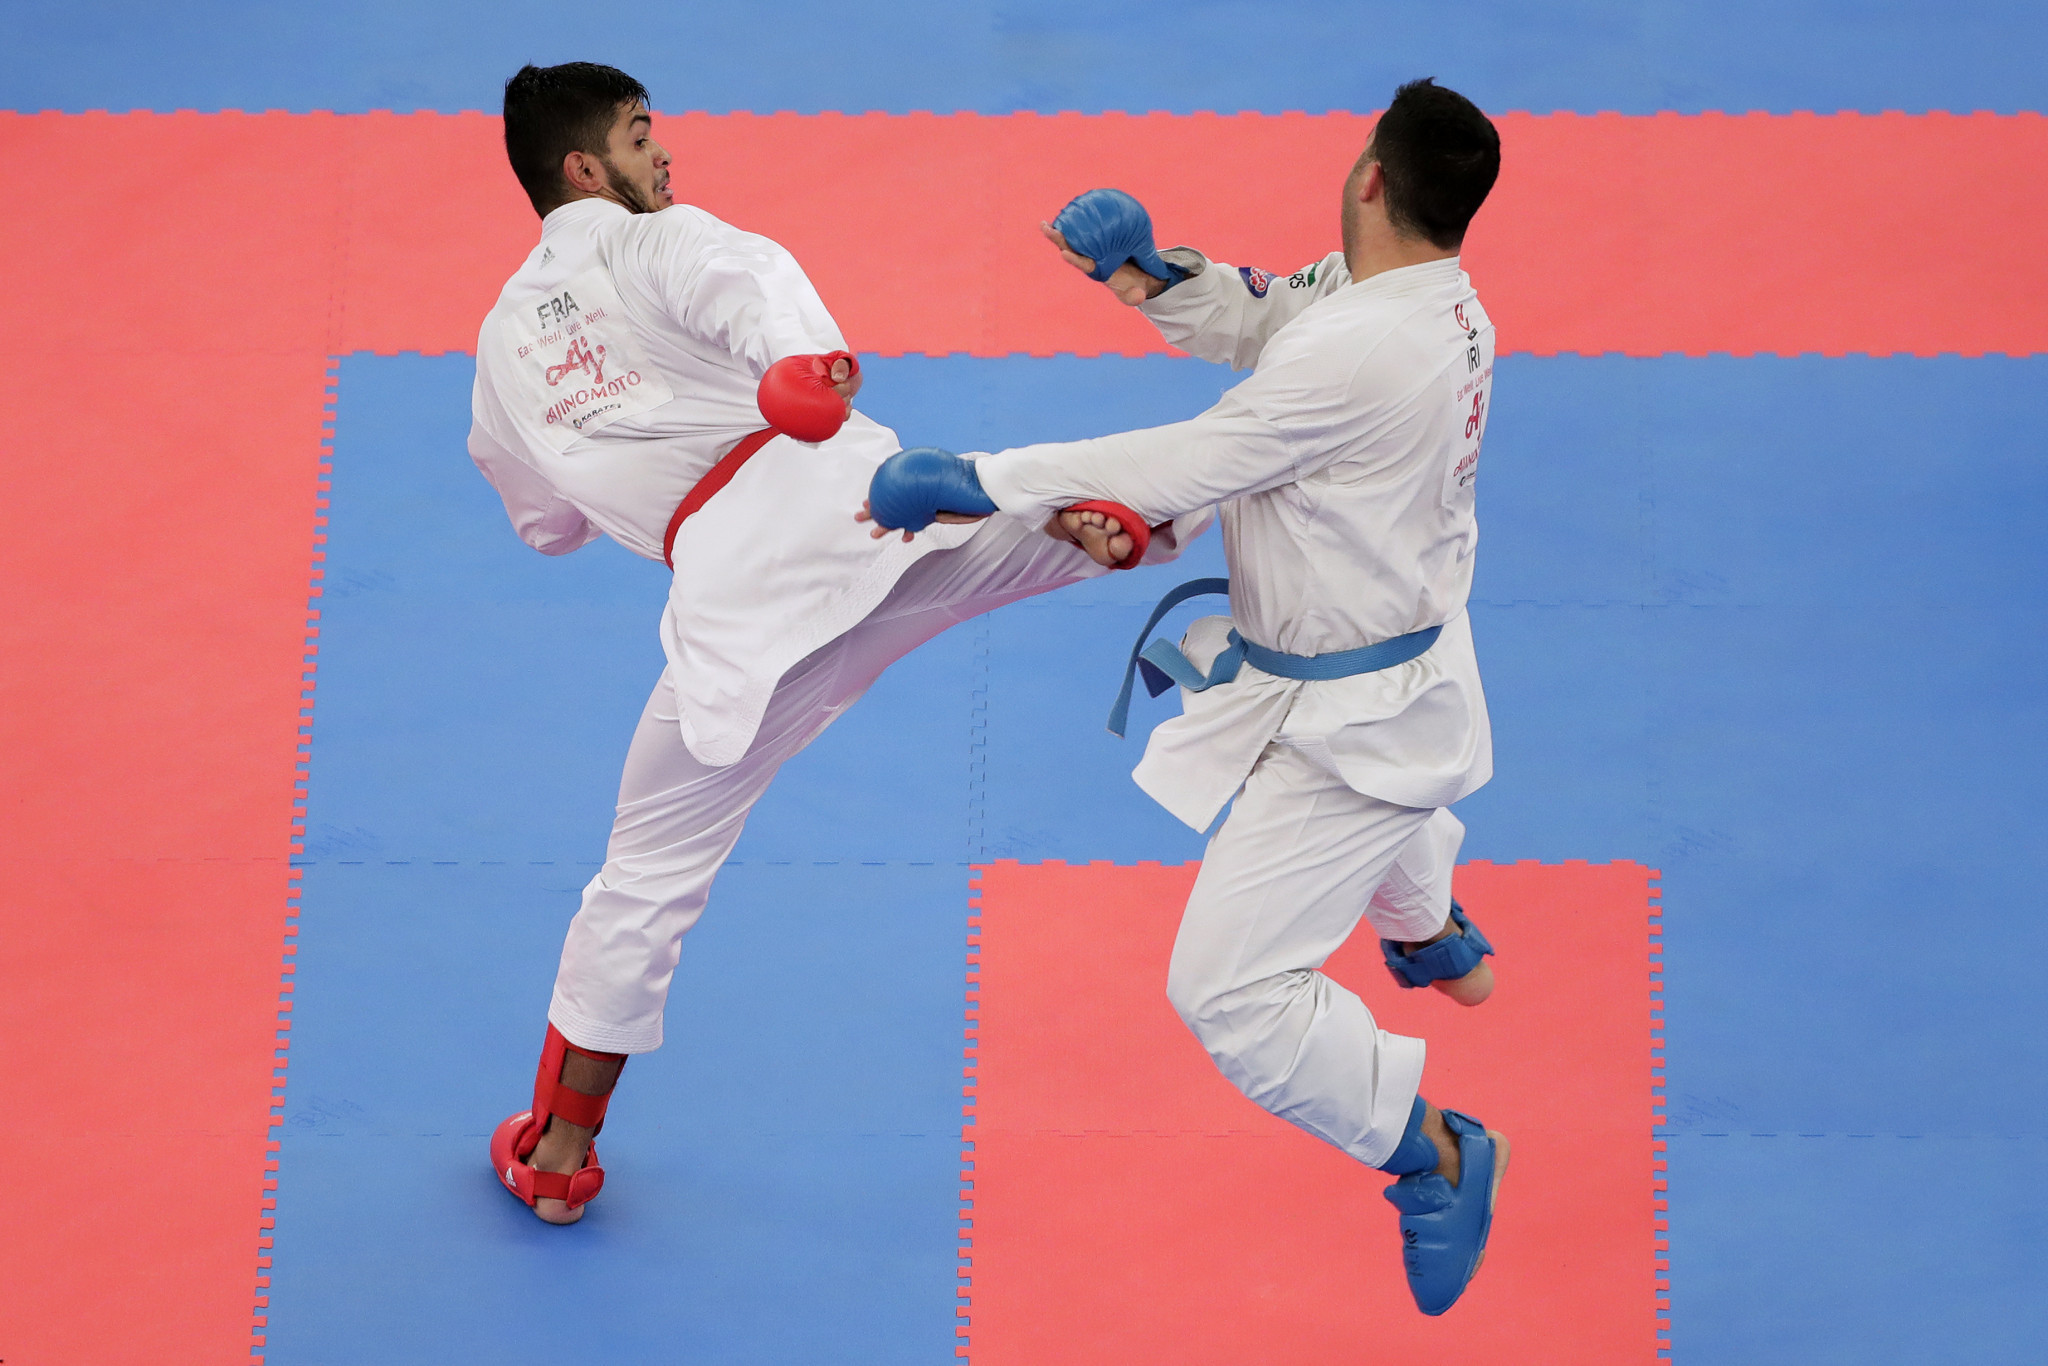 The World Karate Federation has announced contingency plans for its Olympic qualification system ©Getty Images